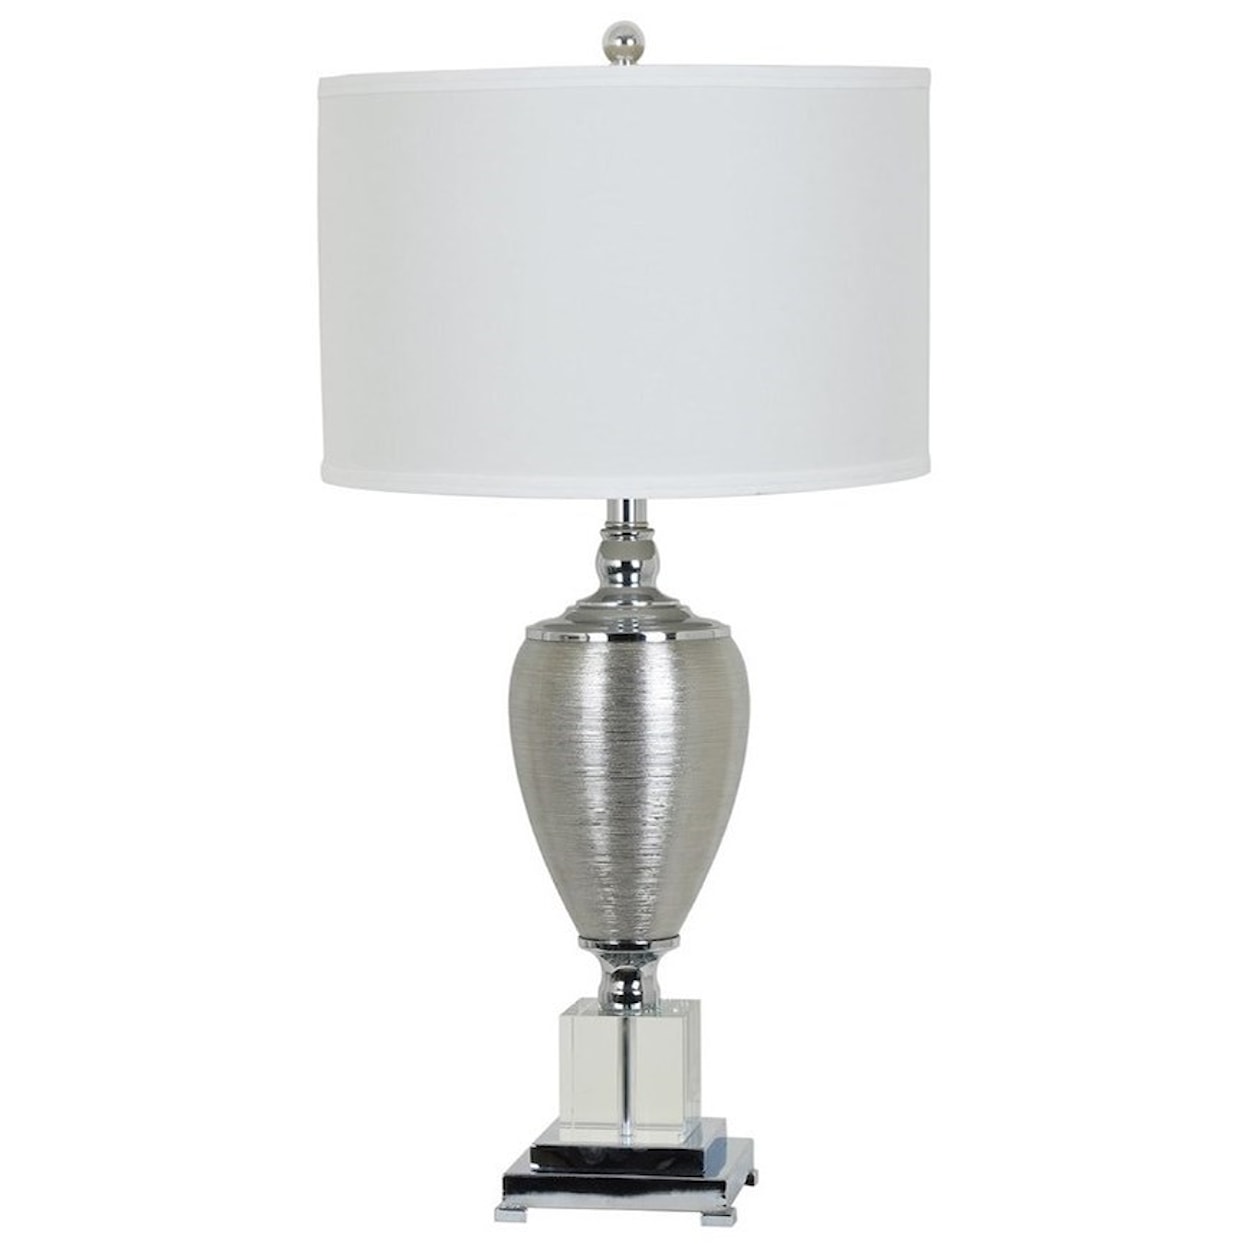 Crestview Collection Lighting Genie Table Lamp